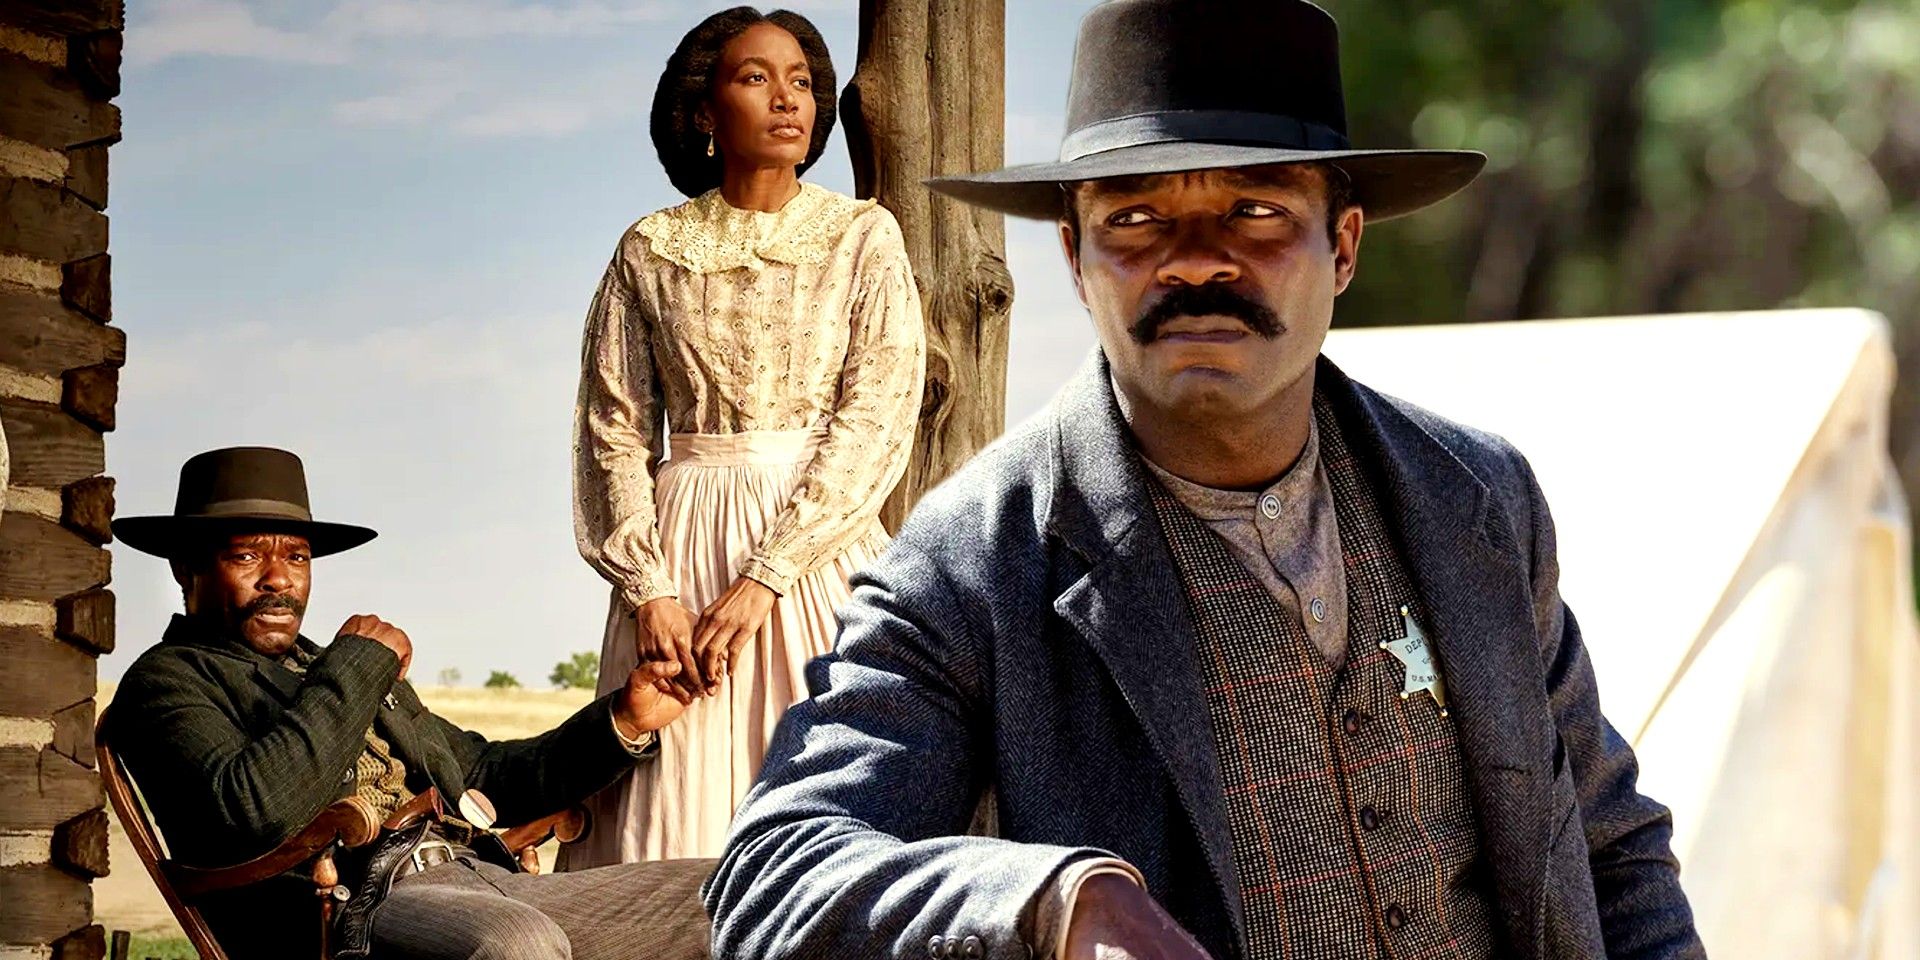 New Yellowstone Spinoff Revealed In First Lawmen: Bass Reeves Images, 2023 Release Confirmed